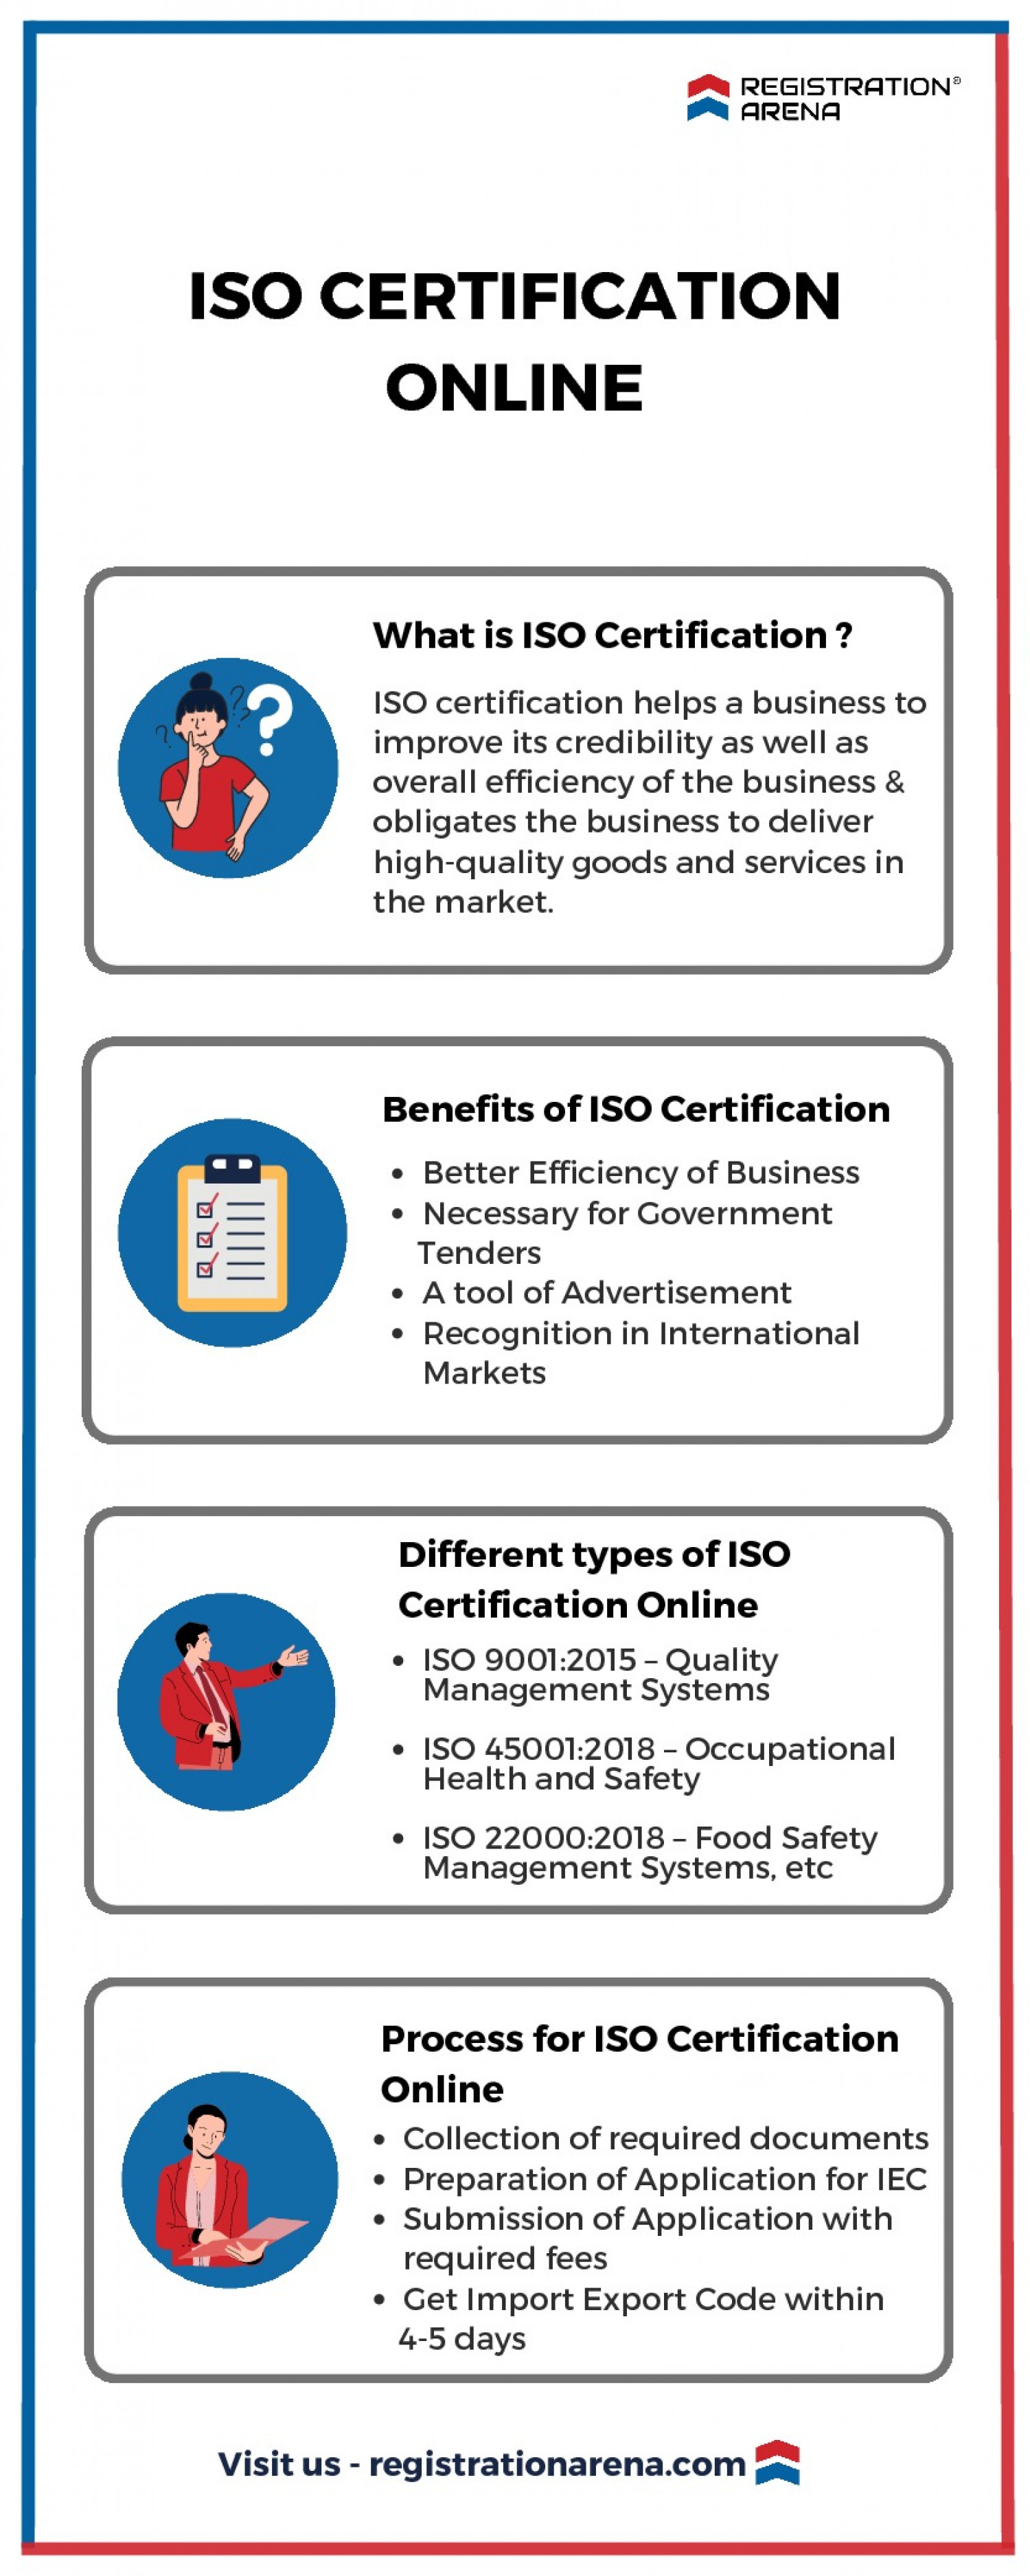 ISO Certification Online Infographic